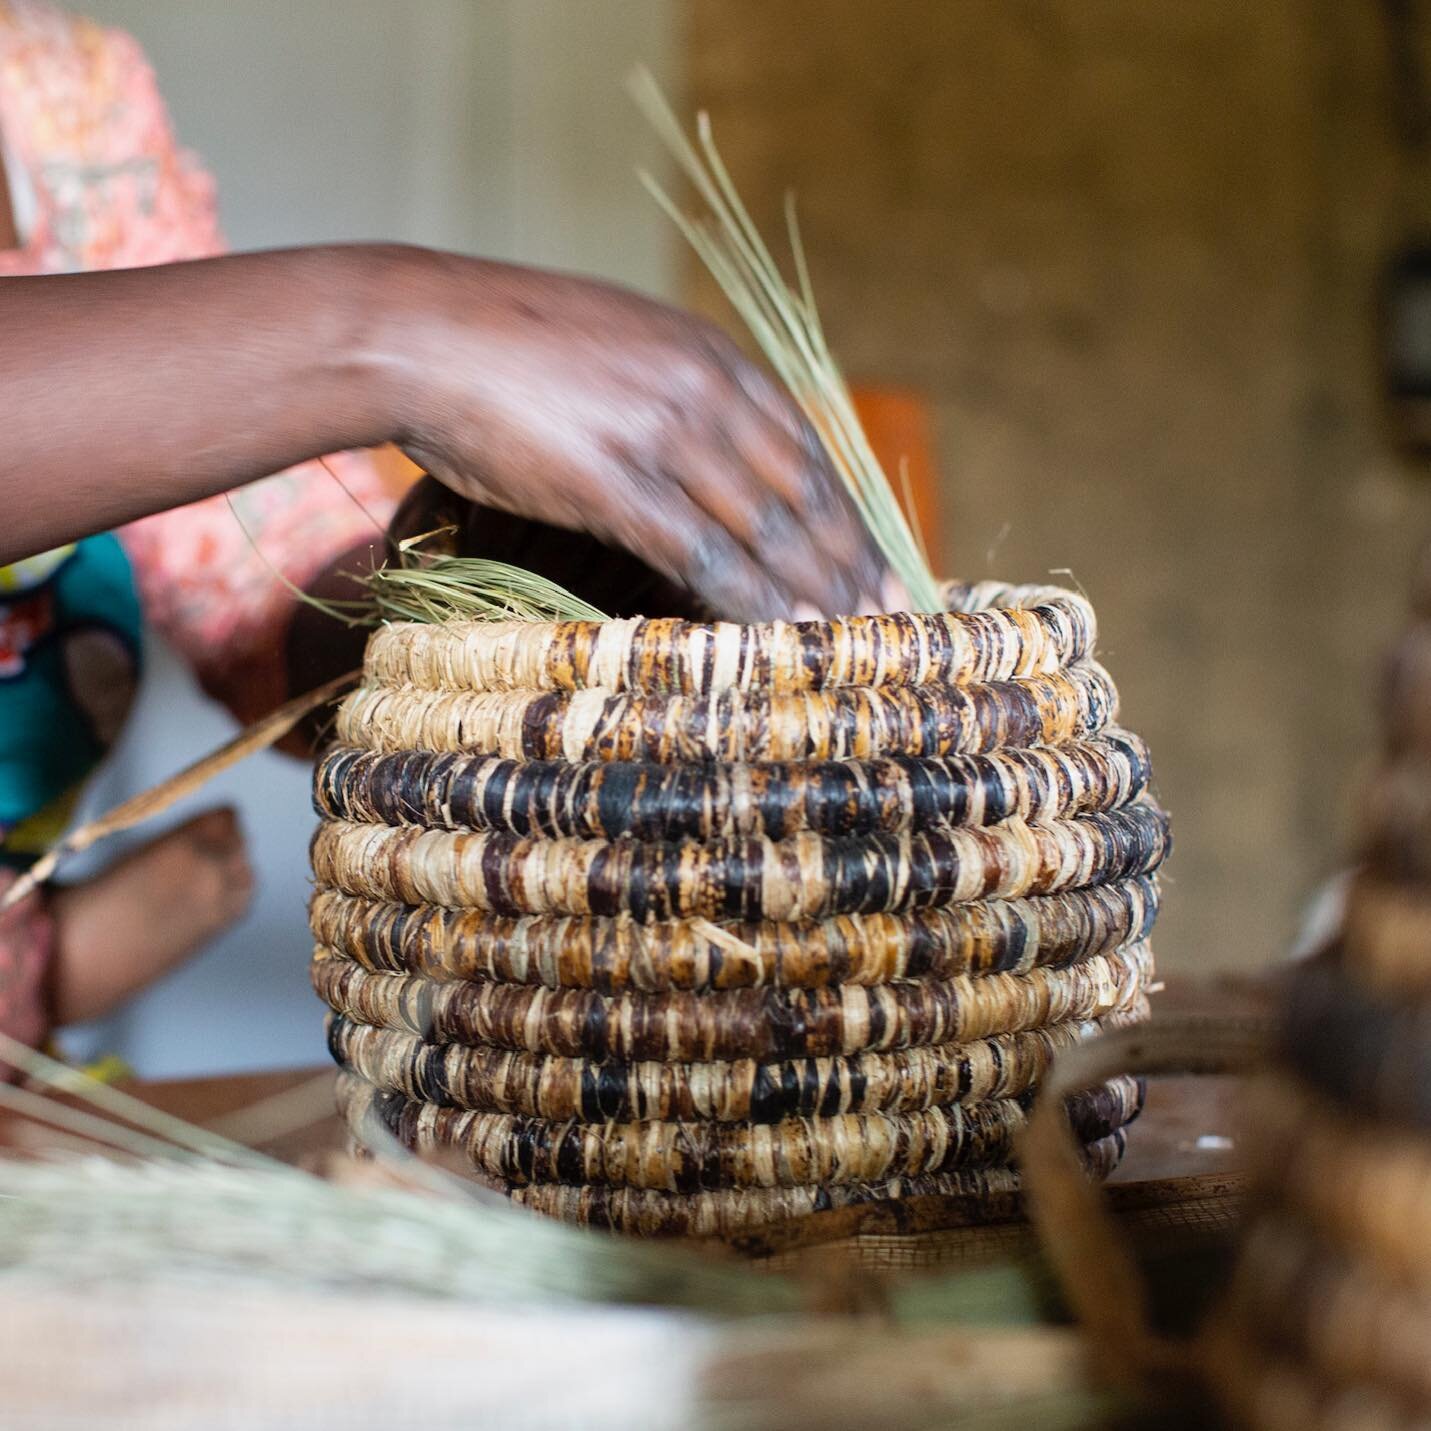 Sweet grass wrapped in dried banana leaves... sometimes I forget how truly remarkable these baskets (and the hands that weave them) really are. #madeinrwanda 📸: @alisonholcomb